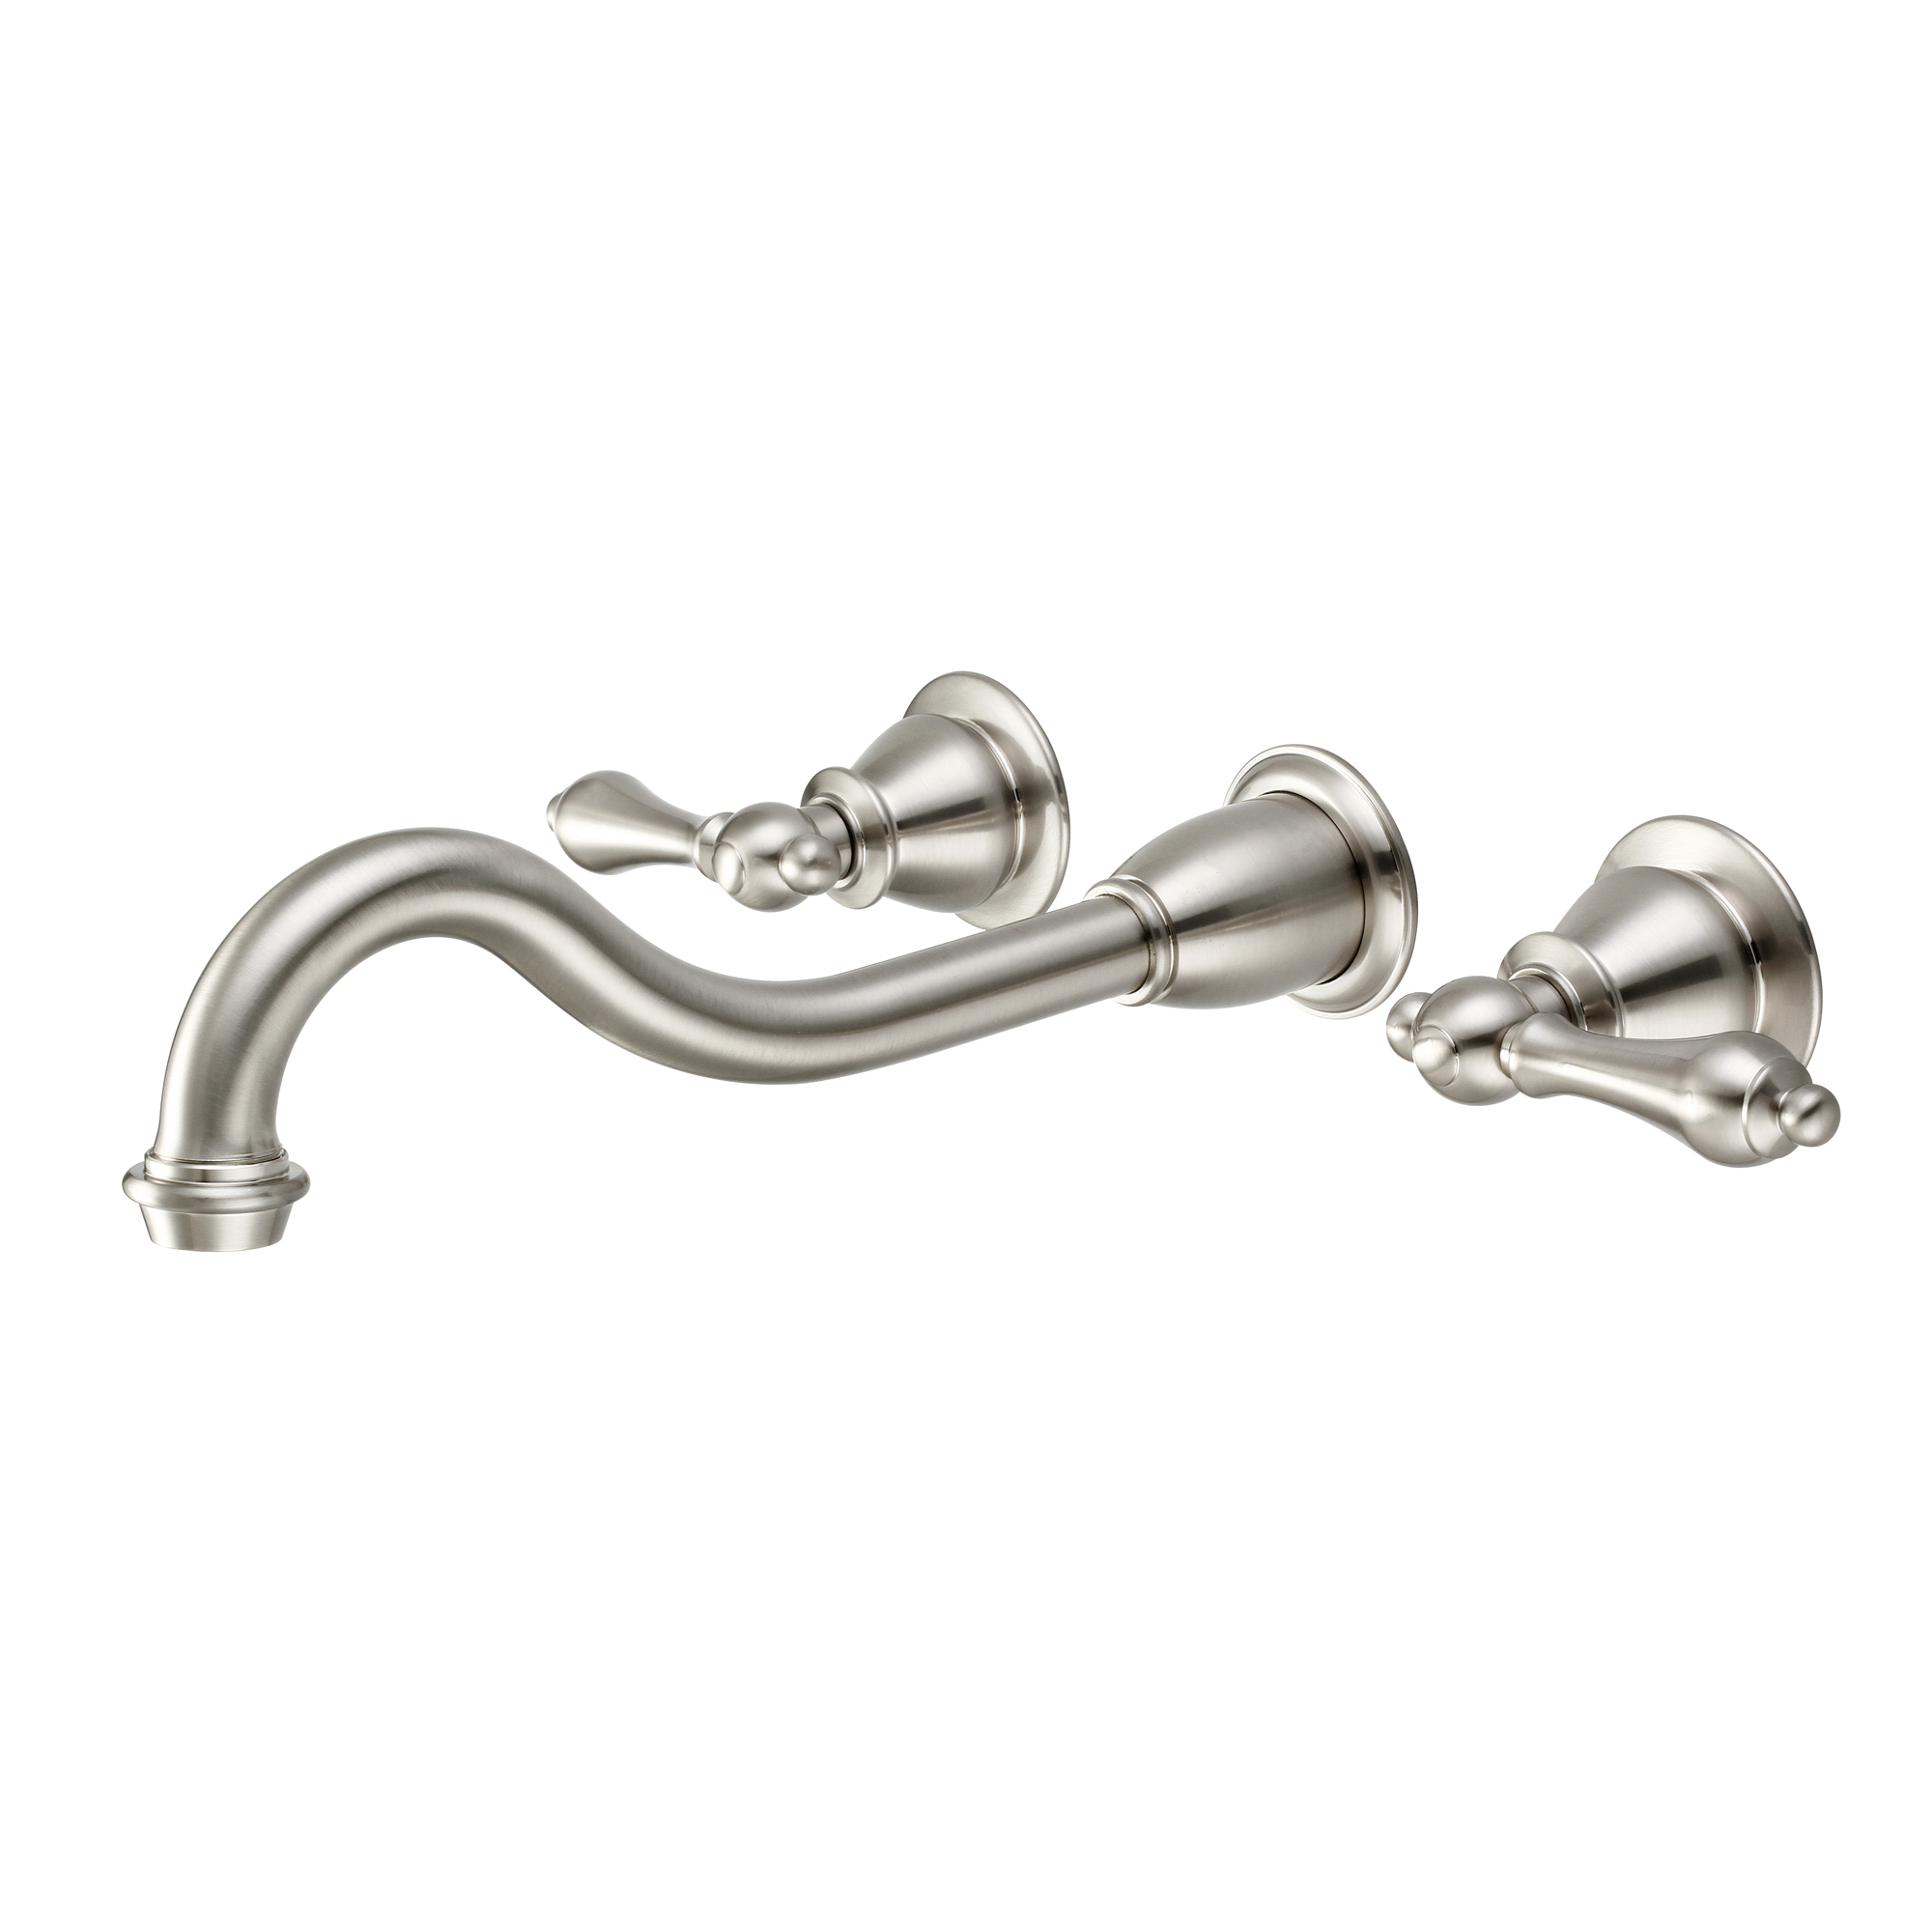 Elegant Spout Wall Mount Vessel/Lavatory Faucets in Brushed Nickel Finish With Metal Lever Handles Without Labels